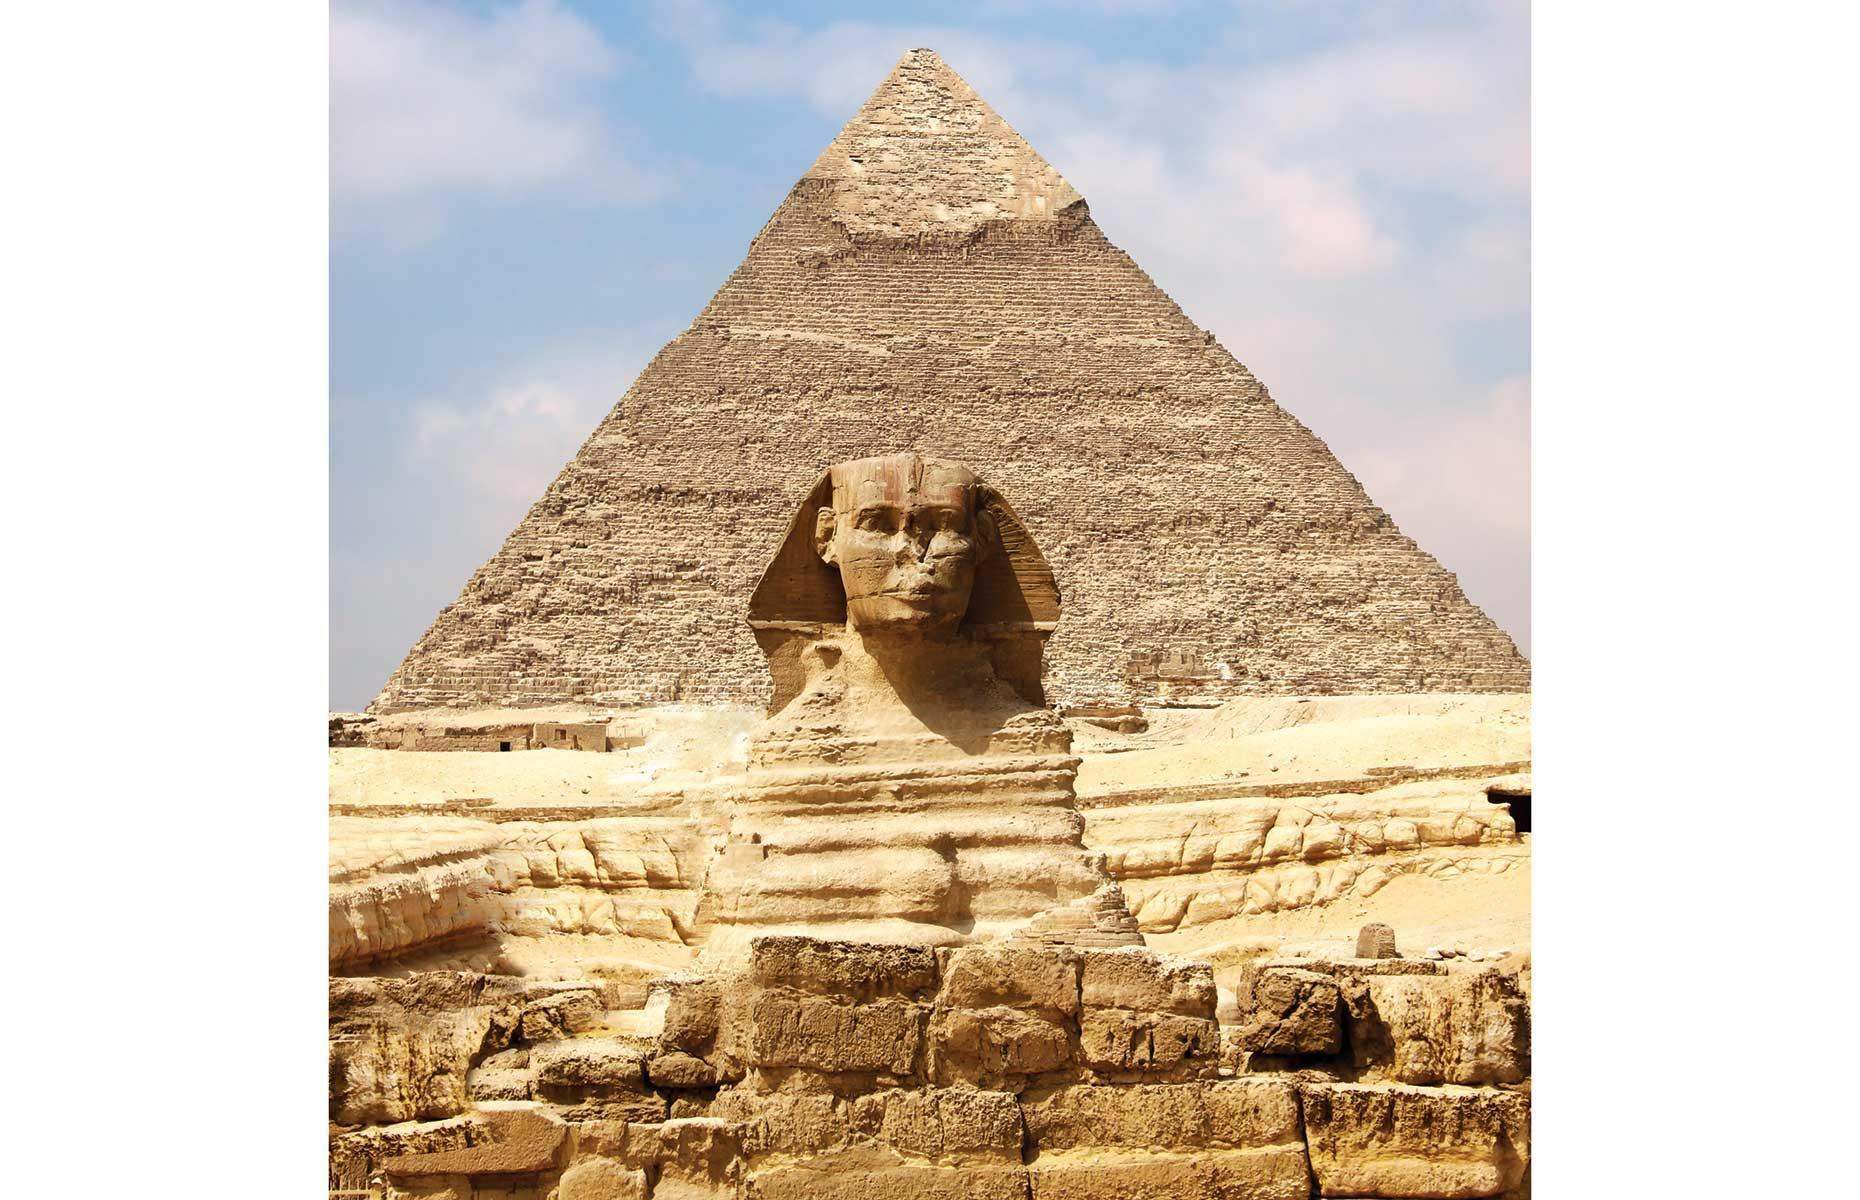 <p>Khafre Pyramid is the second-largest and second-tallest pyramid in the Great Pyramids of Giza complex. King Khafre (2558−2532 BC) built this pyramid next to his father’s and is situated 33 feet (10m) higher on the plateau than Khufu Pyramid, giving it a deceivingly larger size; its total height is actually 448 feet (136m). Built between roughly 2520 and 2494 BC, the top of the pyramid maintains part of its outer casing of Tura limestone; today, it makes it look a little like a snow-capped mountain. It’s widely believed that the Great Sphinx in front of the pyramid was built for Khafre too.</p>